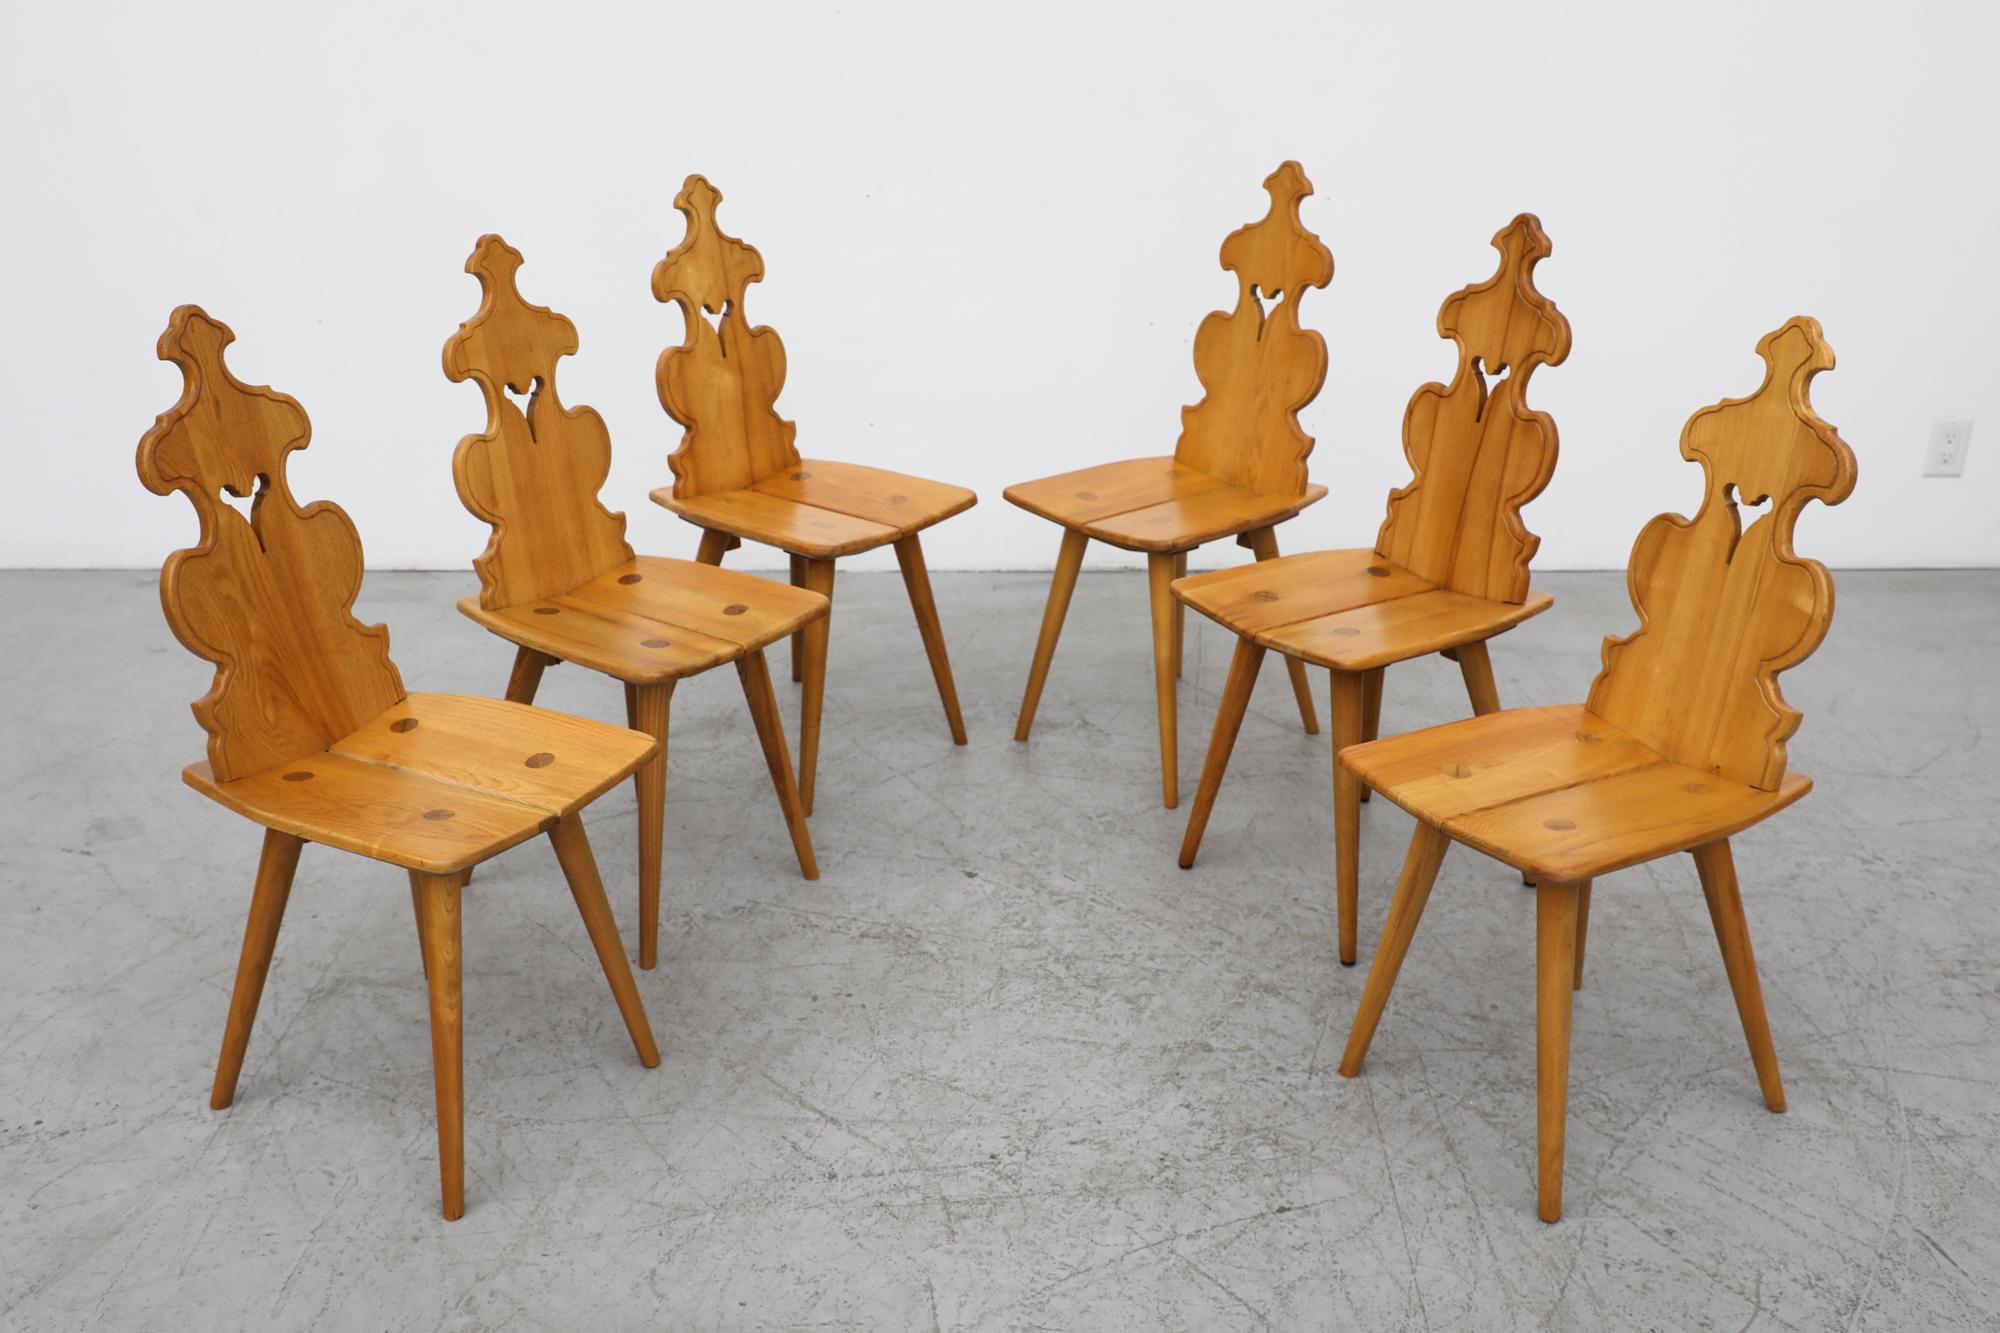 Set of 6 Brutalist Tyrolean Style blonde dining chairs with decorative hand carved backrests. In original condition with visible wear consistent with their age and use. Other set of 4 also available listed separately.